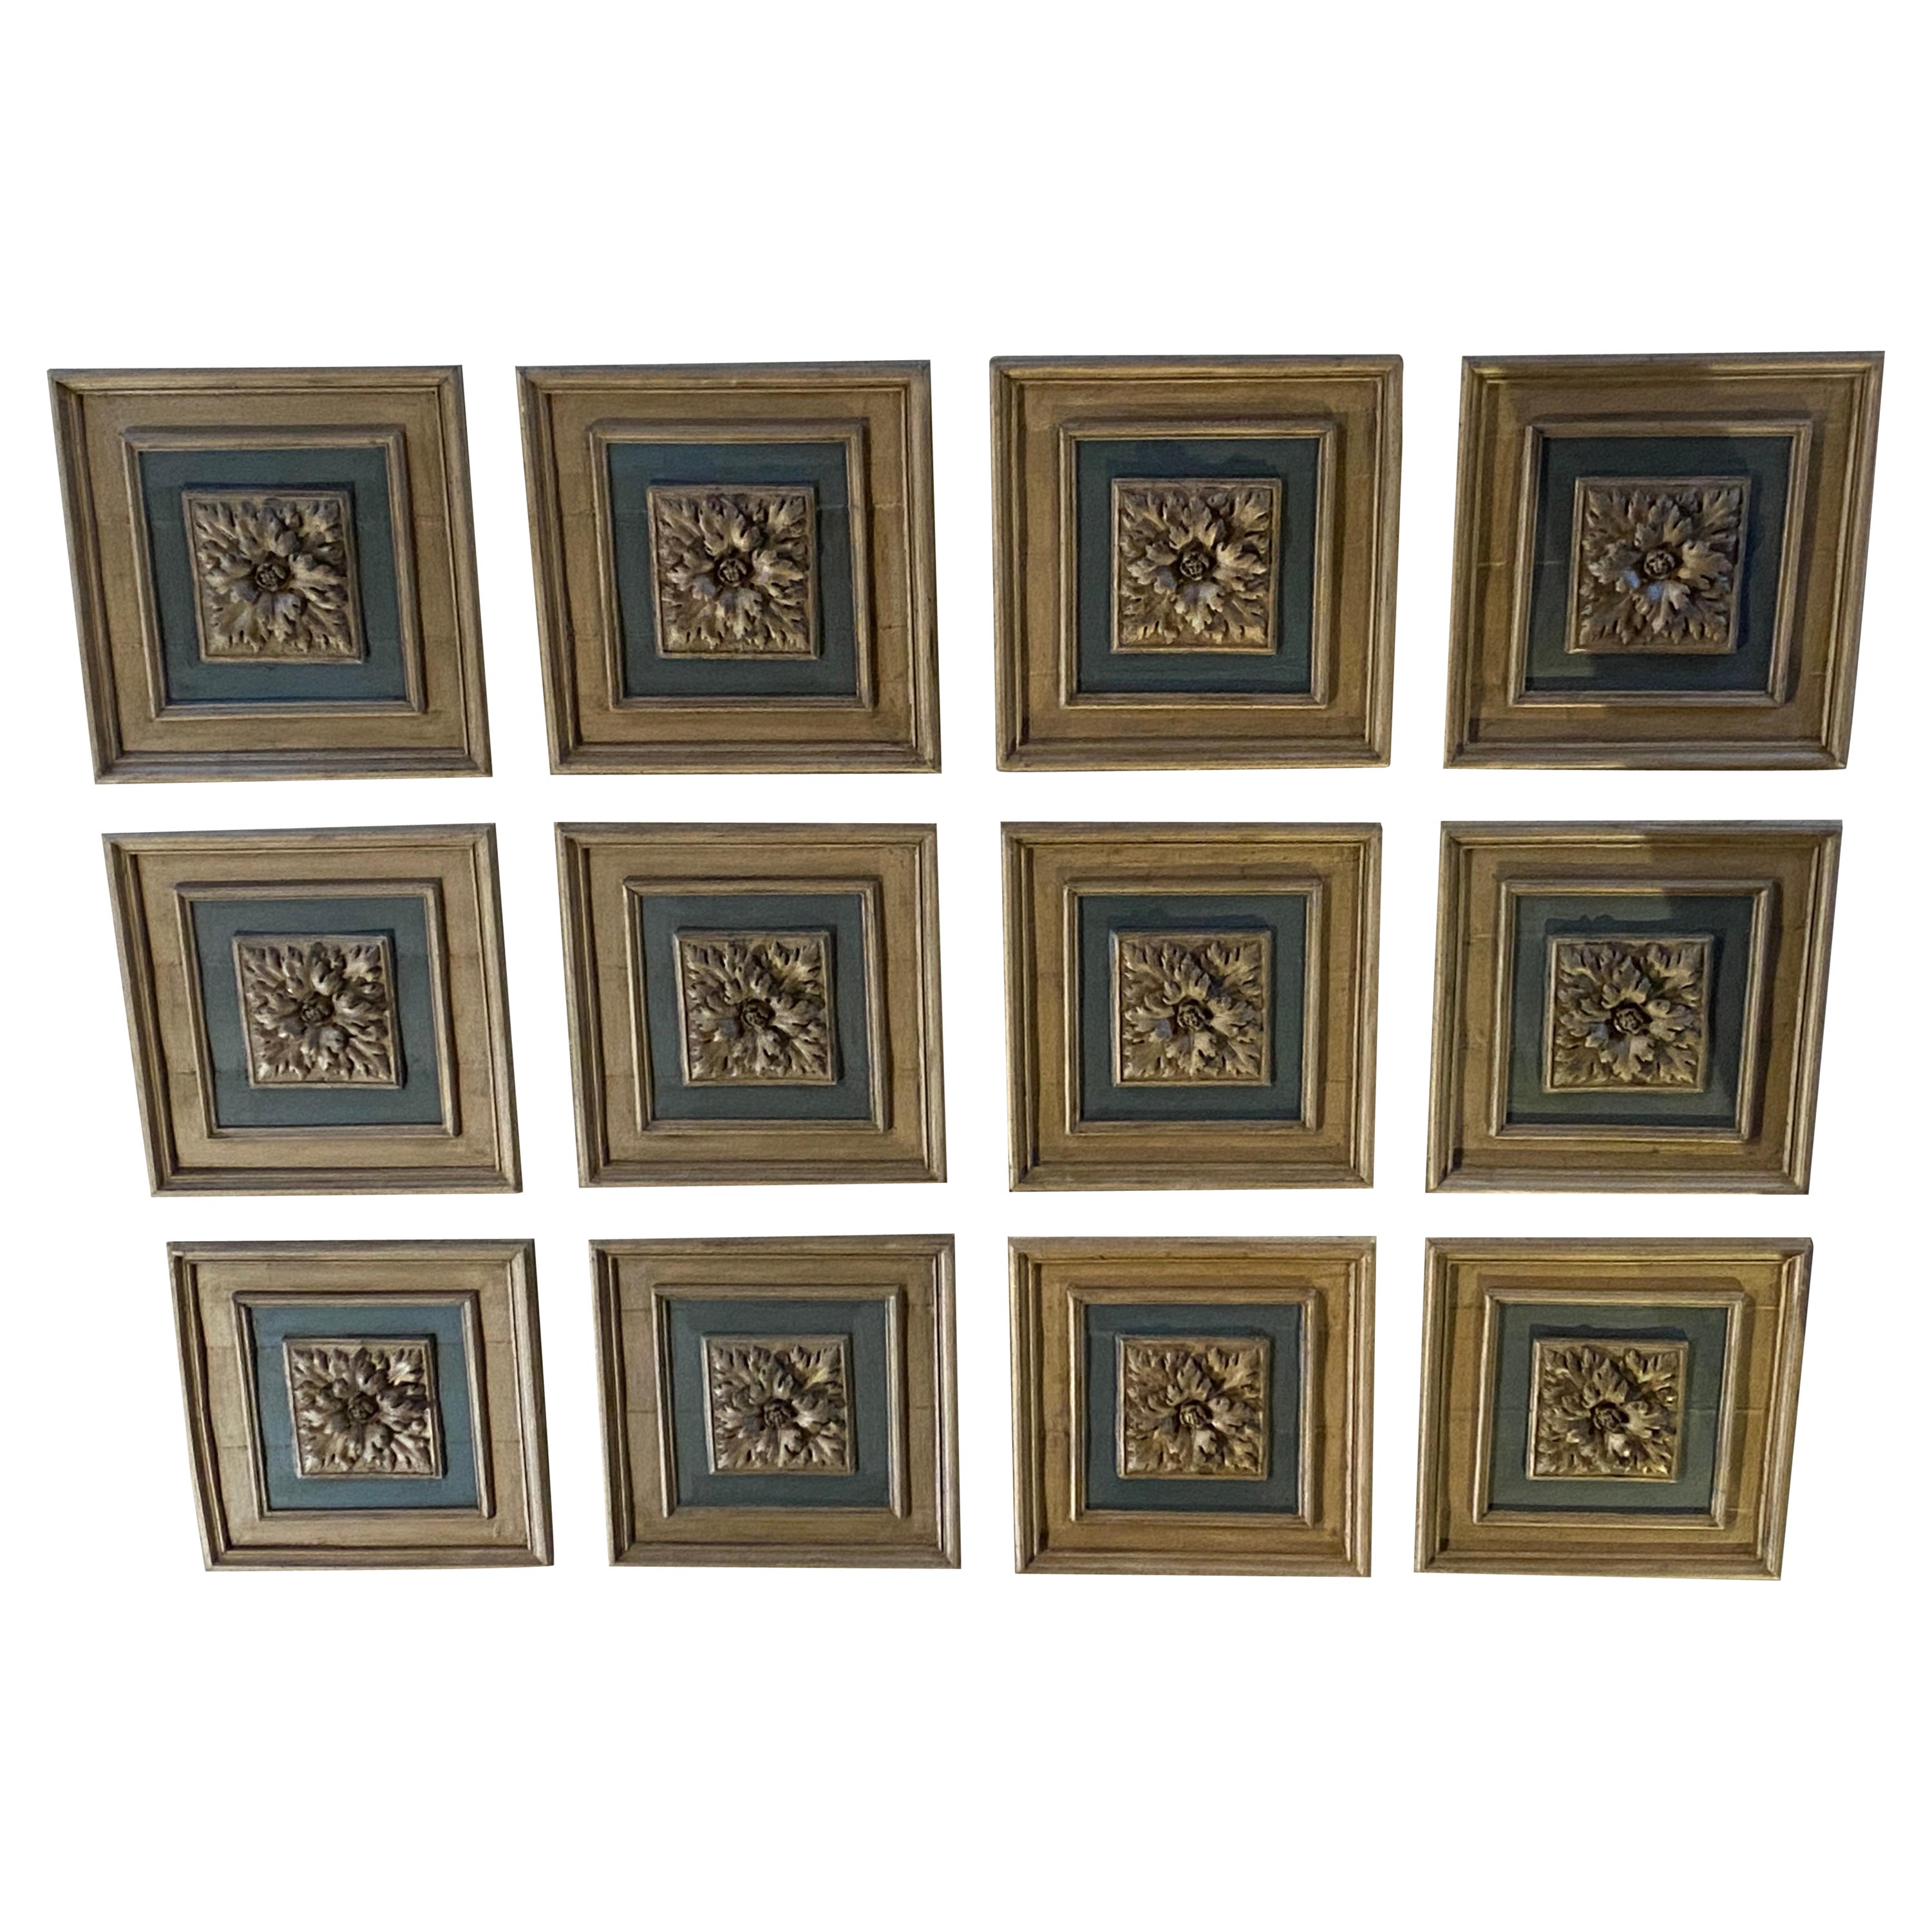 old polychrome wooden coffered ceiling tiles dating from the 19th century For Sale